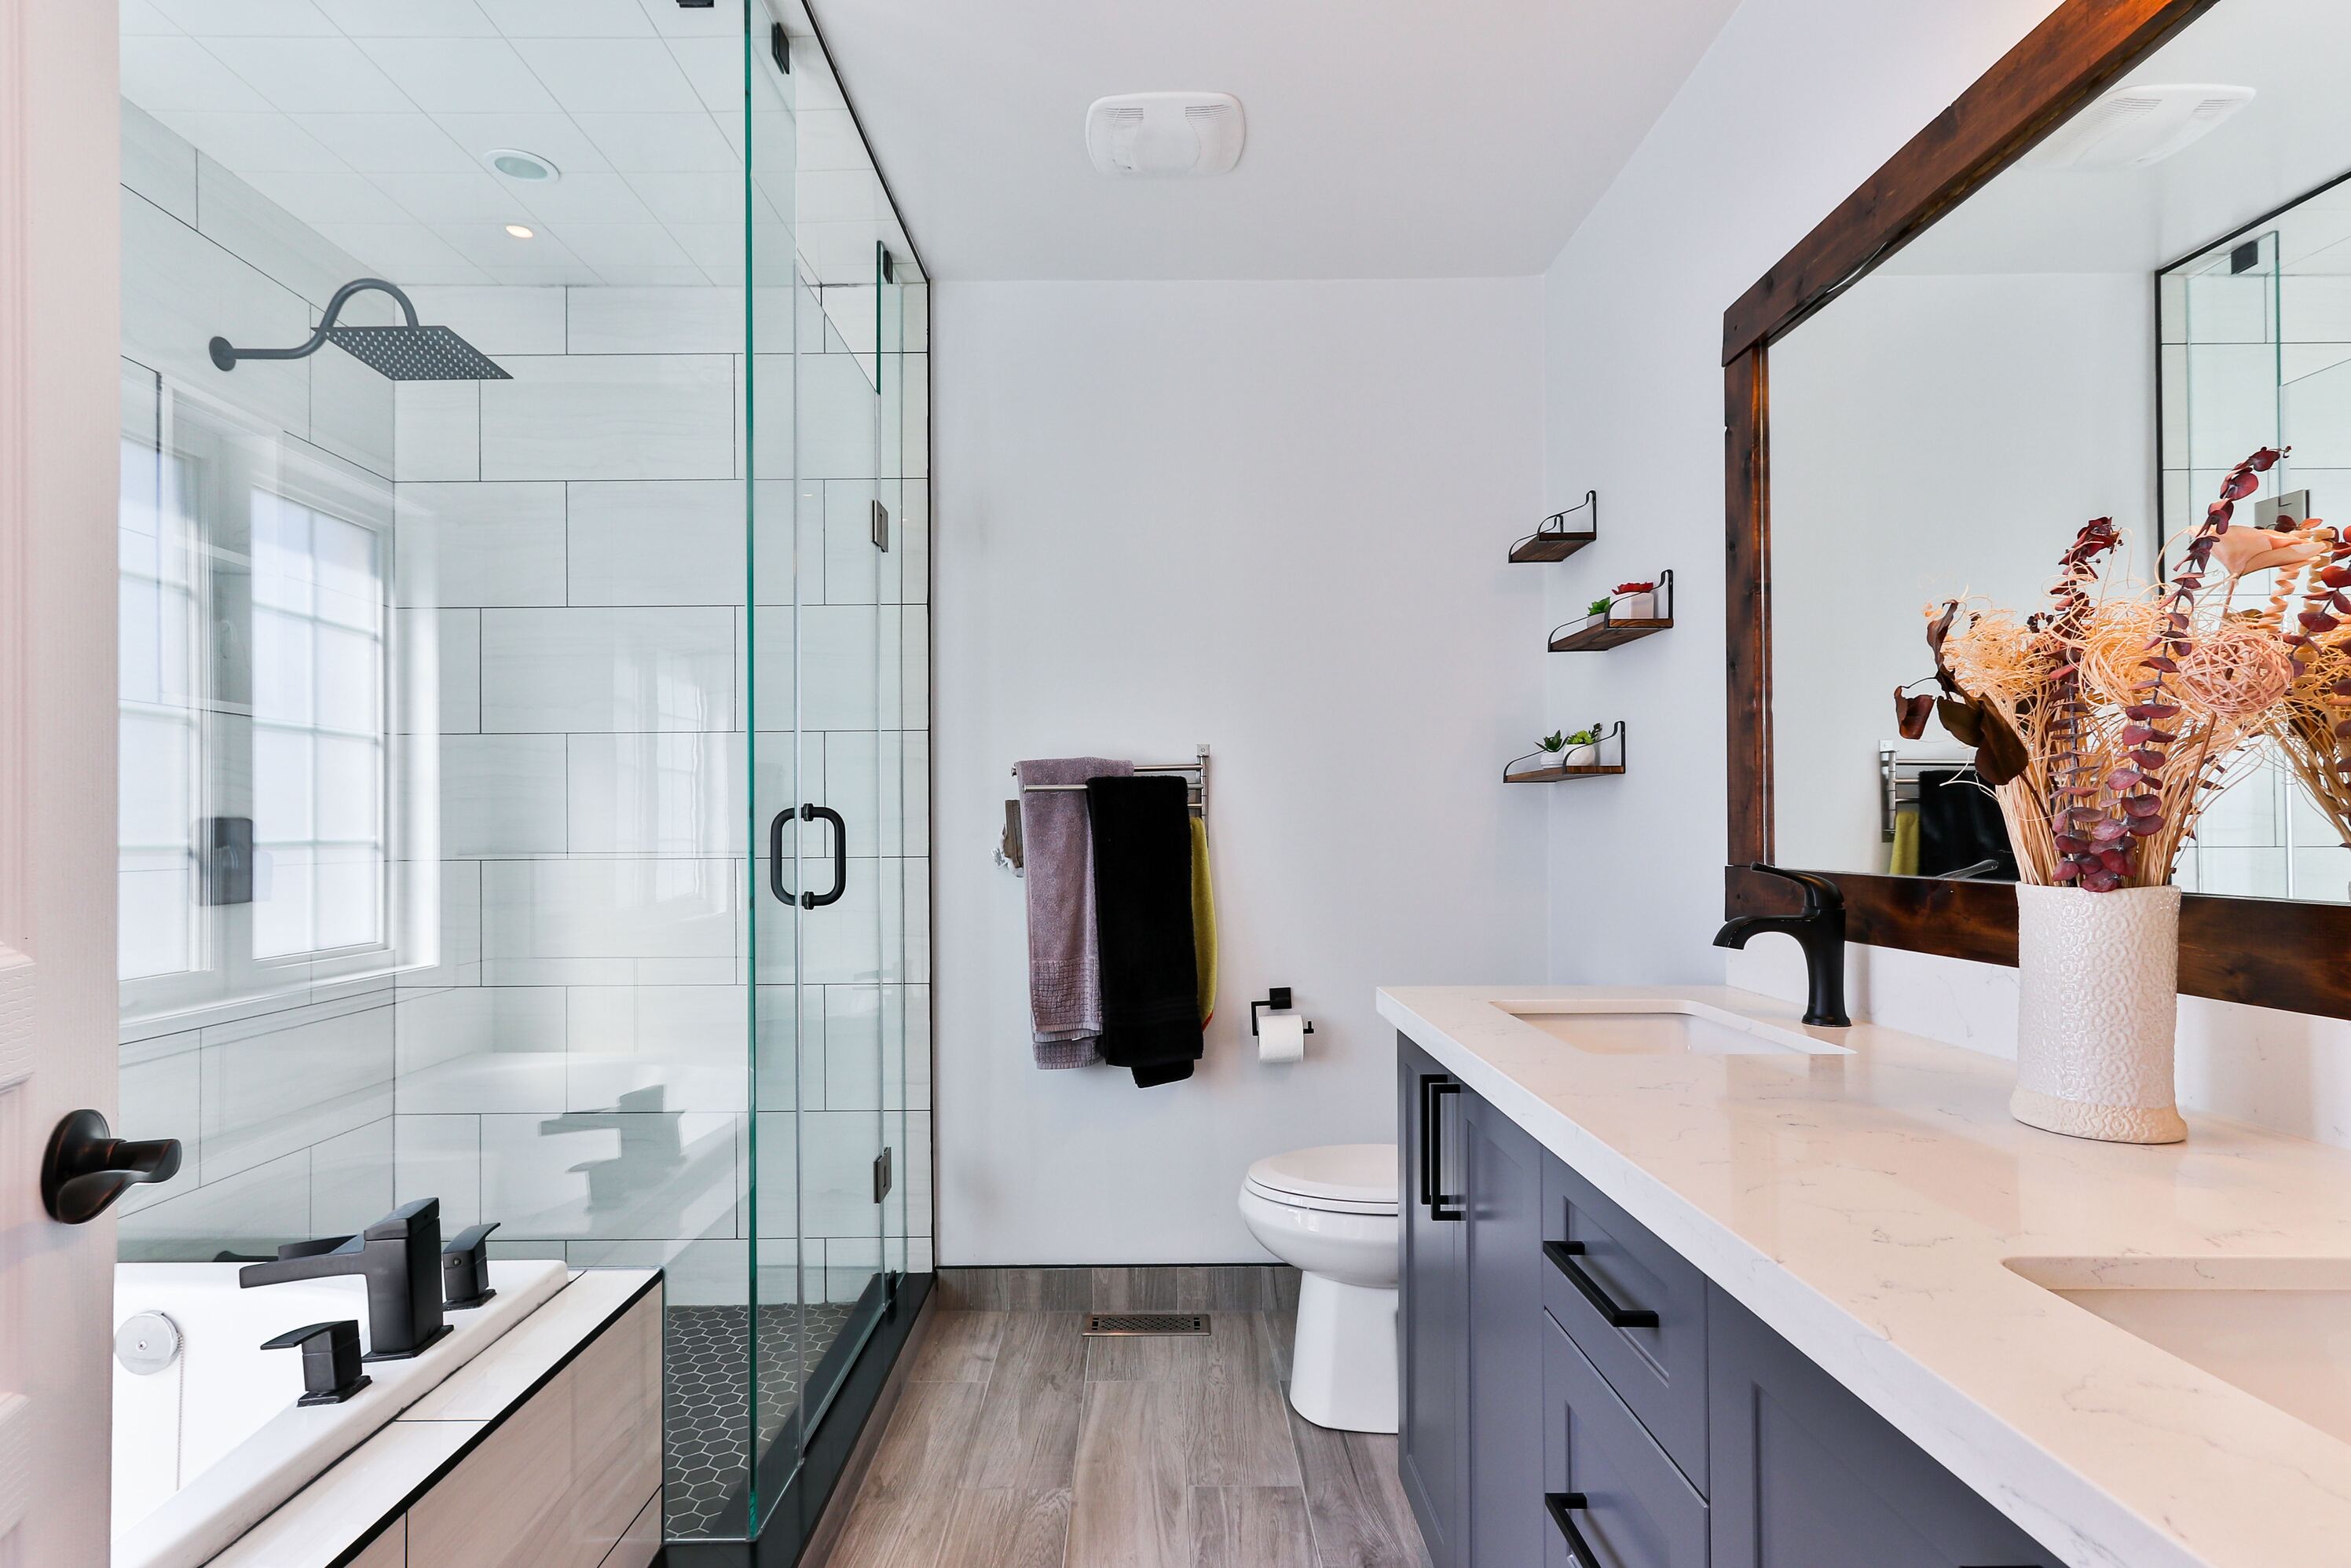 Functionality and Beauty in a Small Bathroom